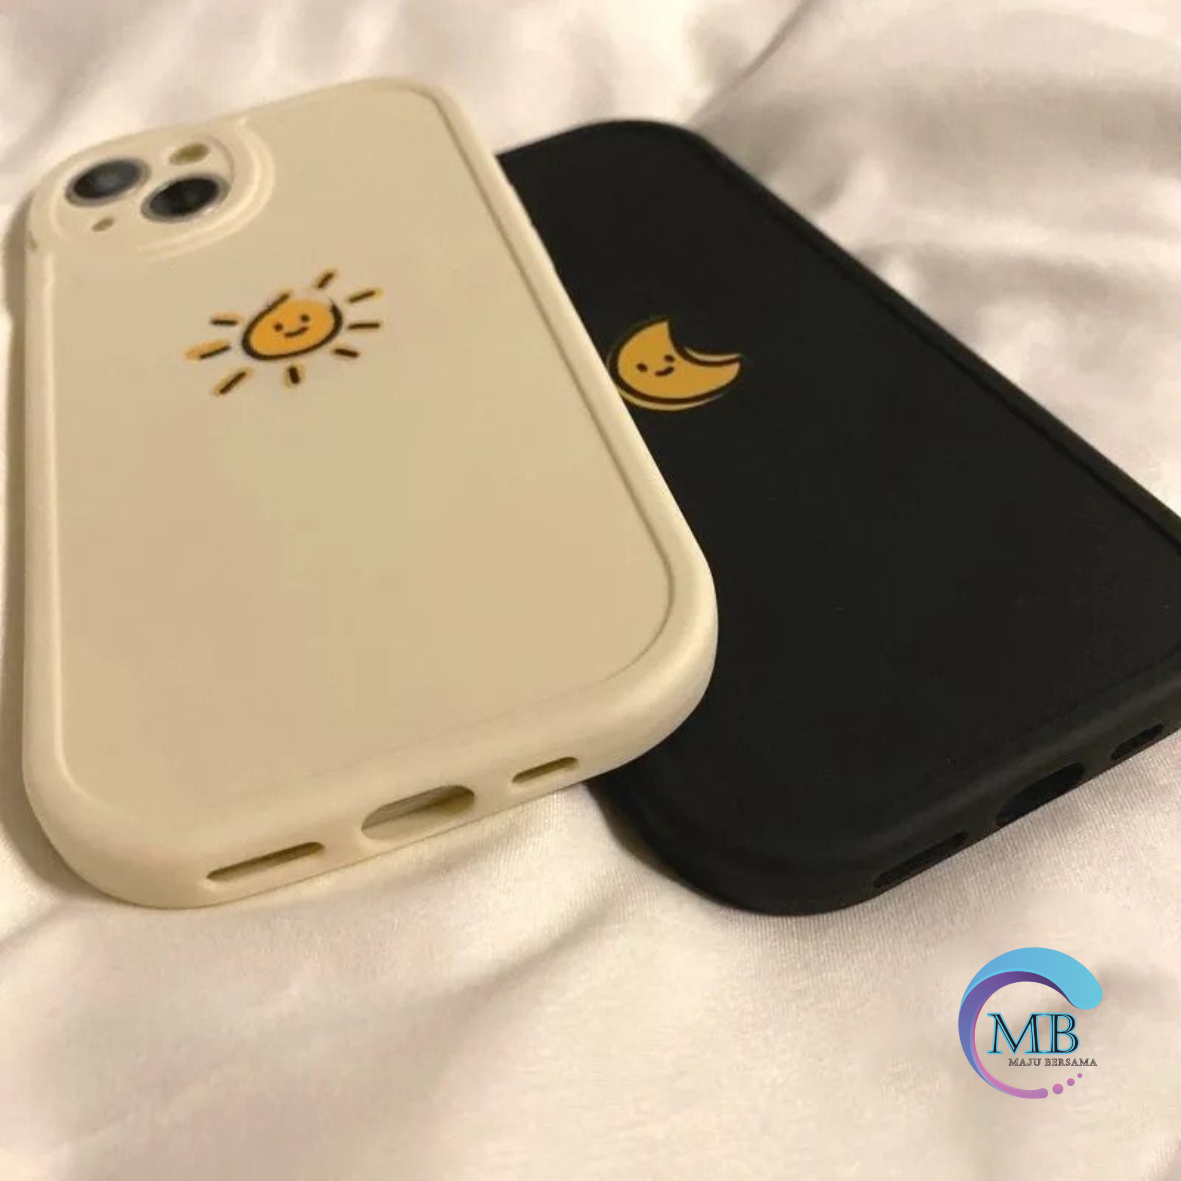 SS822 CASING SOFTCASE SILIKON COUPLES OVAL FOR OPPO A71 A74 A95 A83 A96 9I A53 2015 F1S A59 F5 YOUTH F7 F11 RENO 4 4F F17 5 5F A94 6 7 8 7Z 8Z 8T MB4973